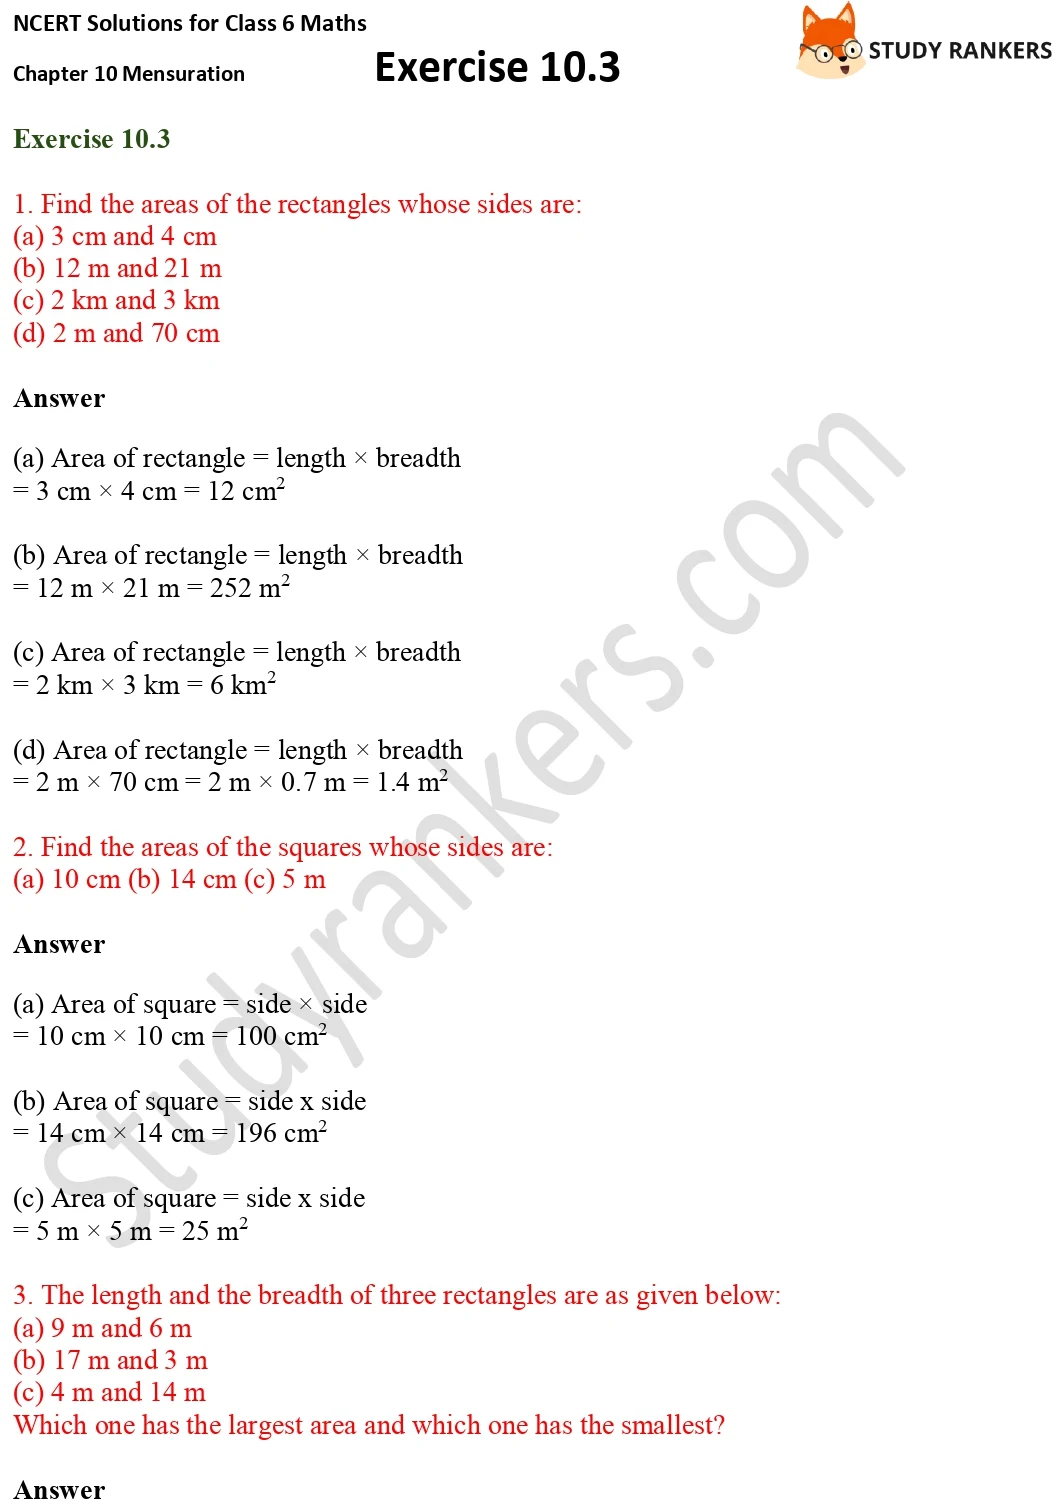 NCERT Solutions for Class 6 Maths Chapter 10 Mensuration Exercise 10.3 Part 1